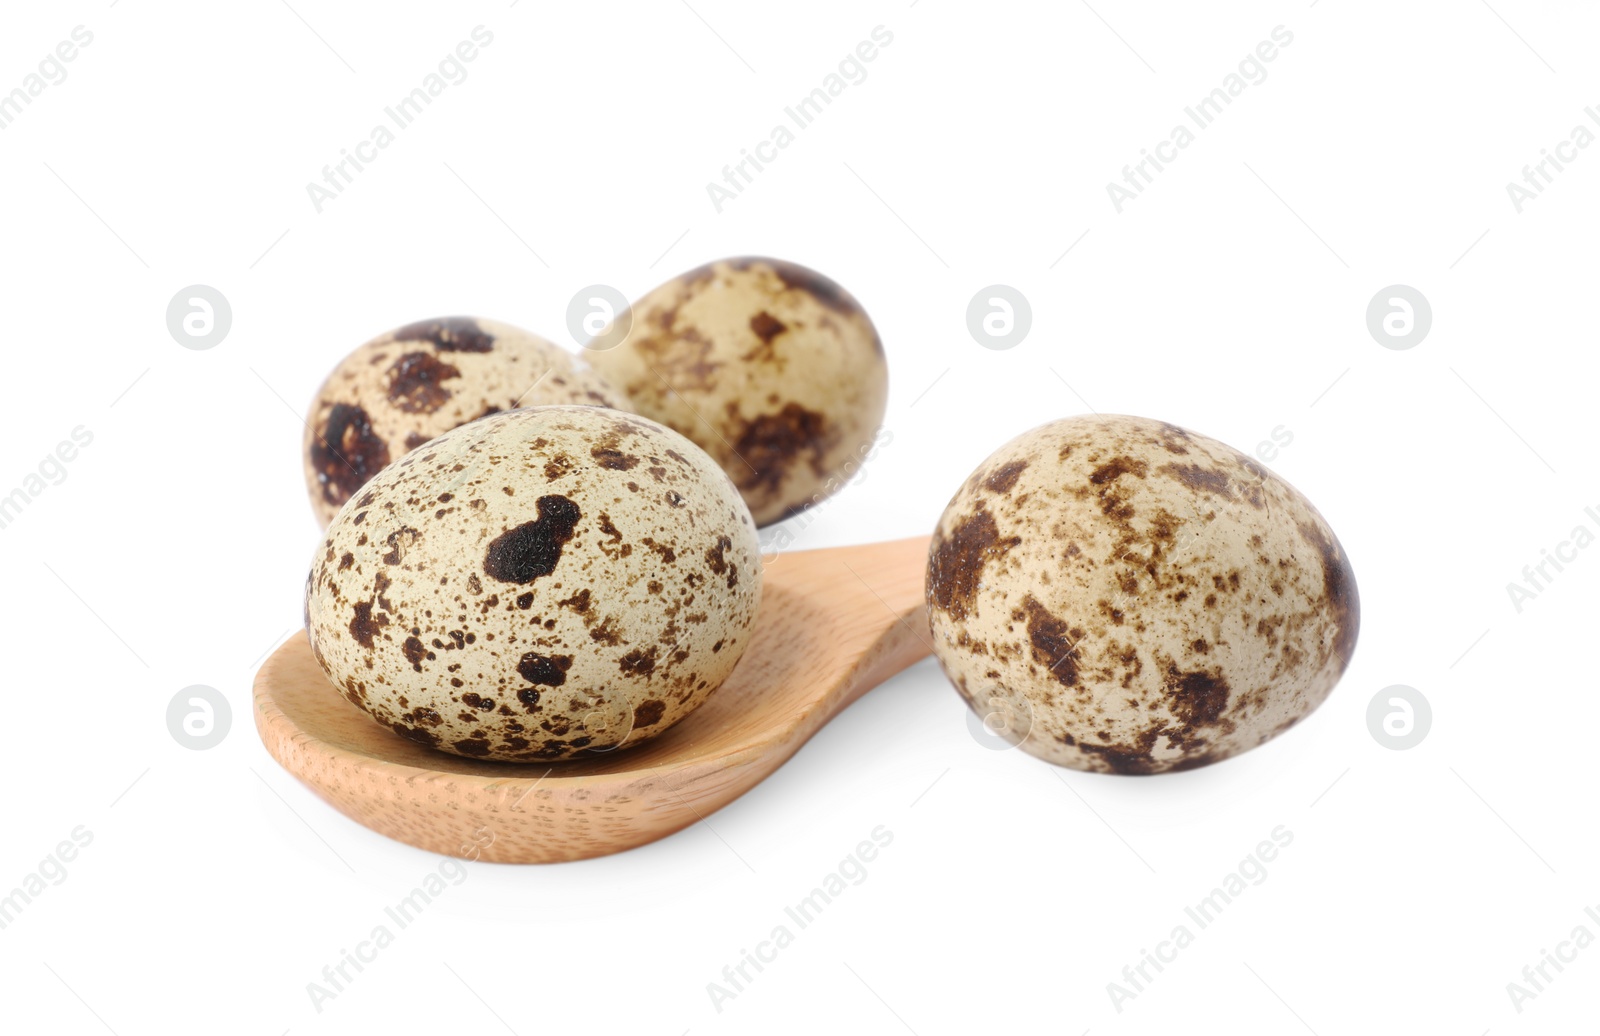 Photo of Wooden spoon and quail eggs on white background